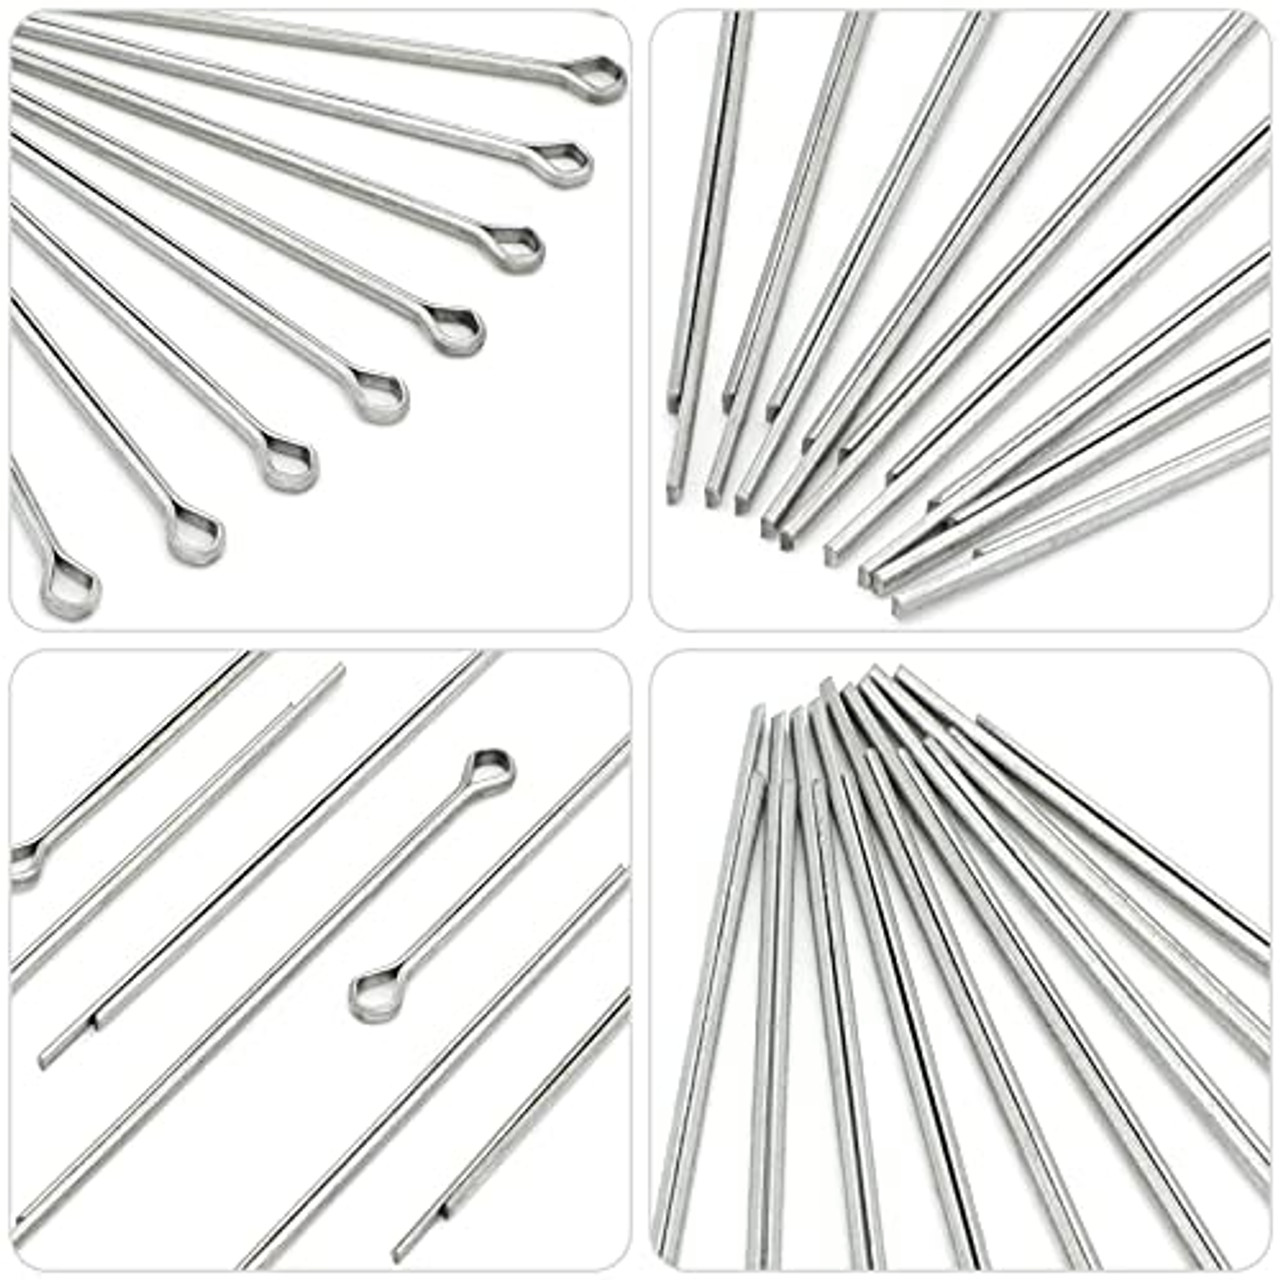 10pcs Candle Wick Centering Devices,candle Wick Holder Stainless Steel Wick  Clips Centering Tool For Candle Diy Making